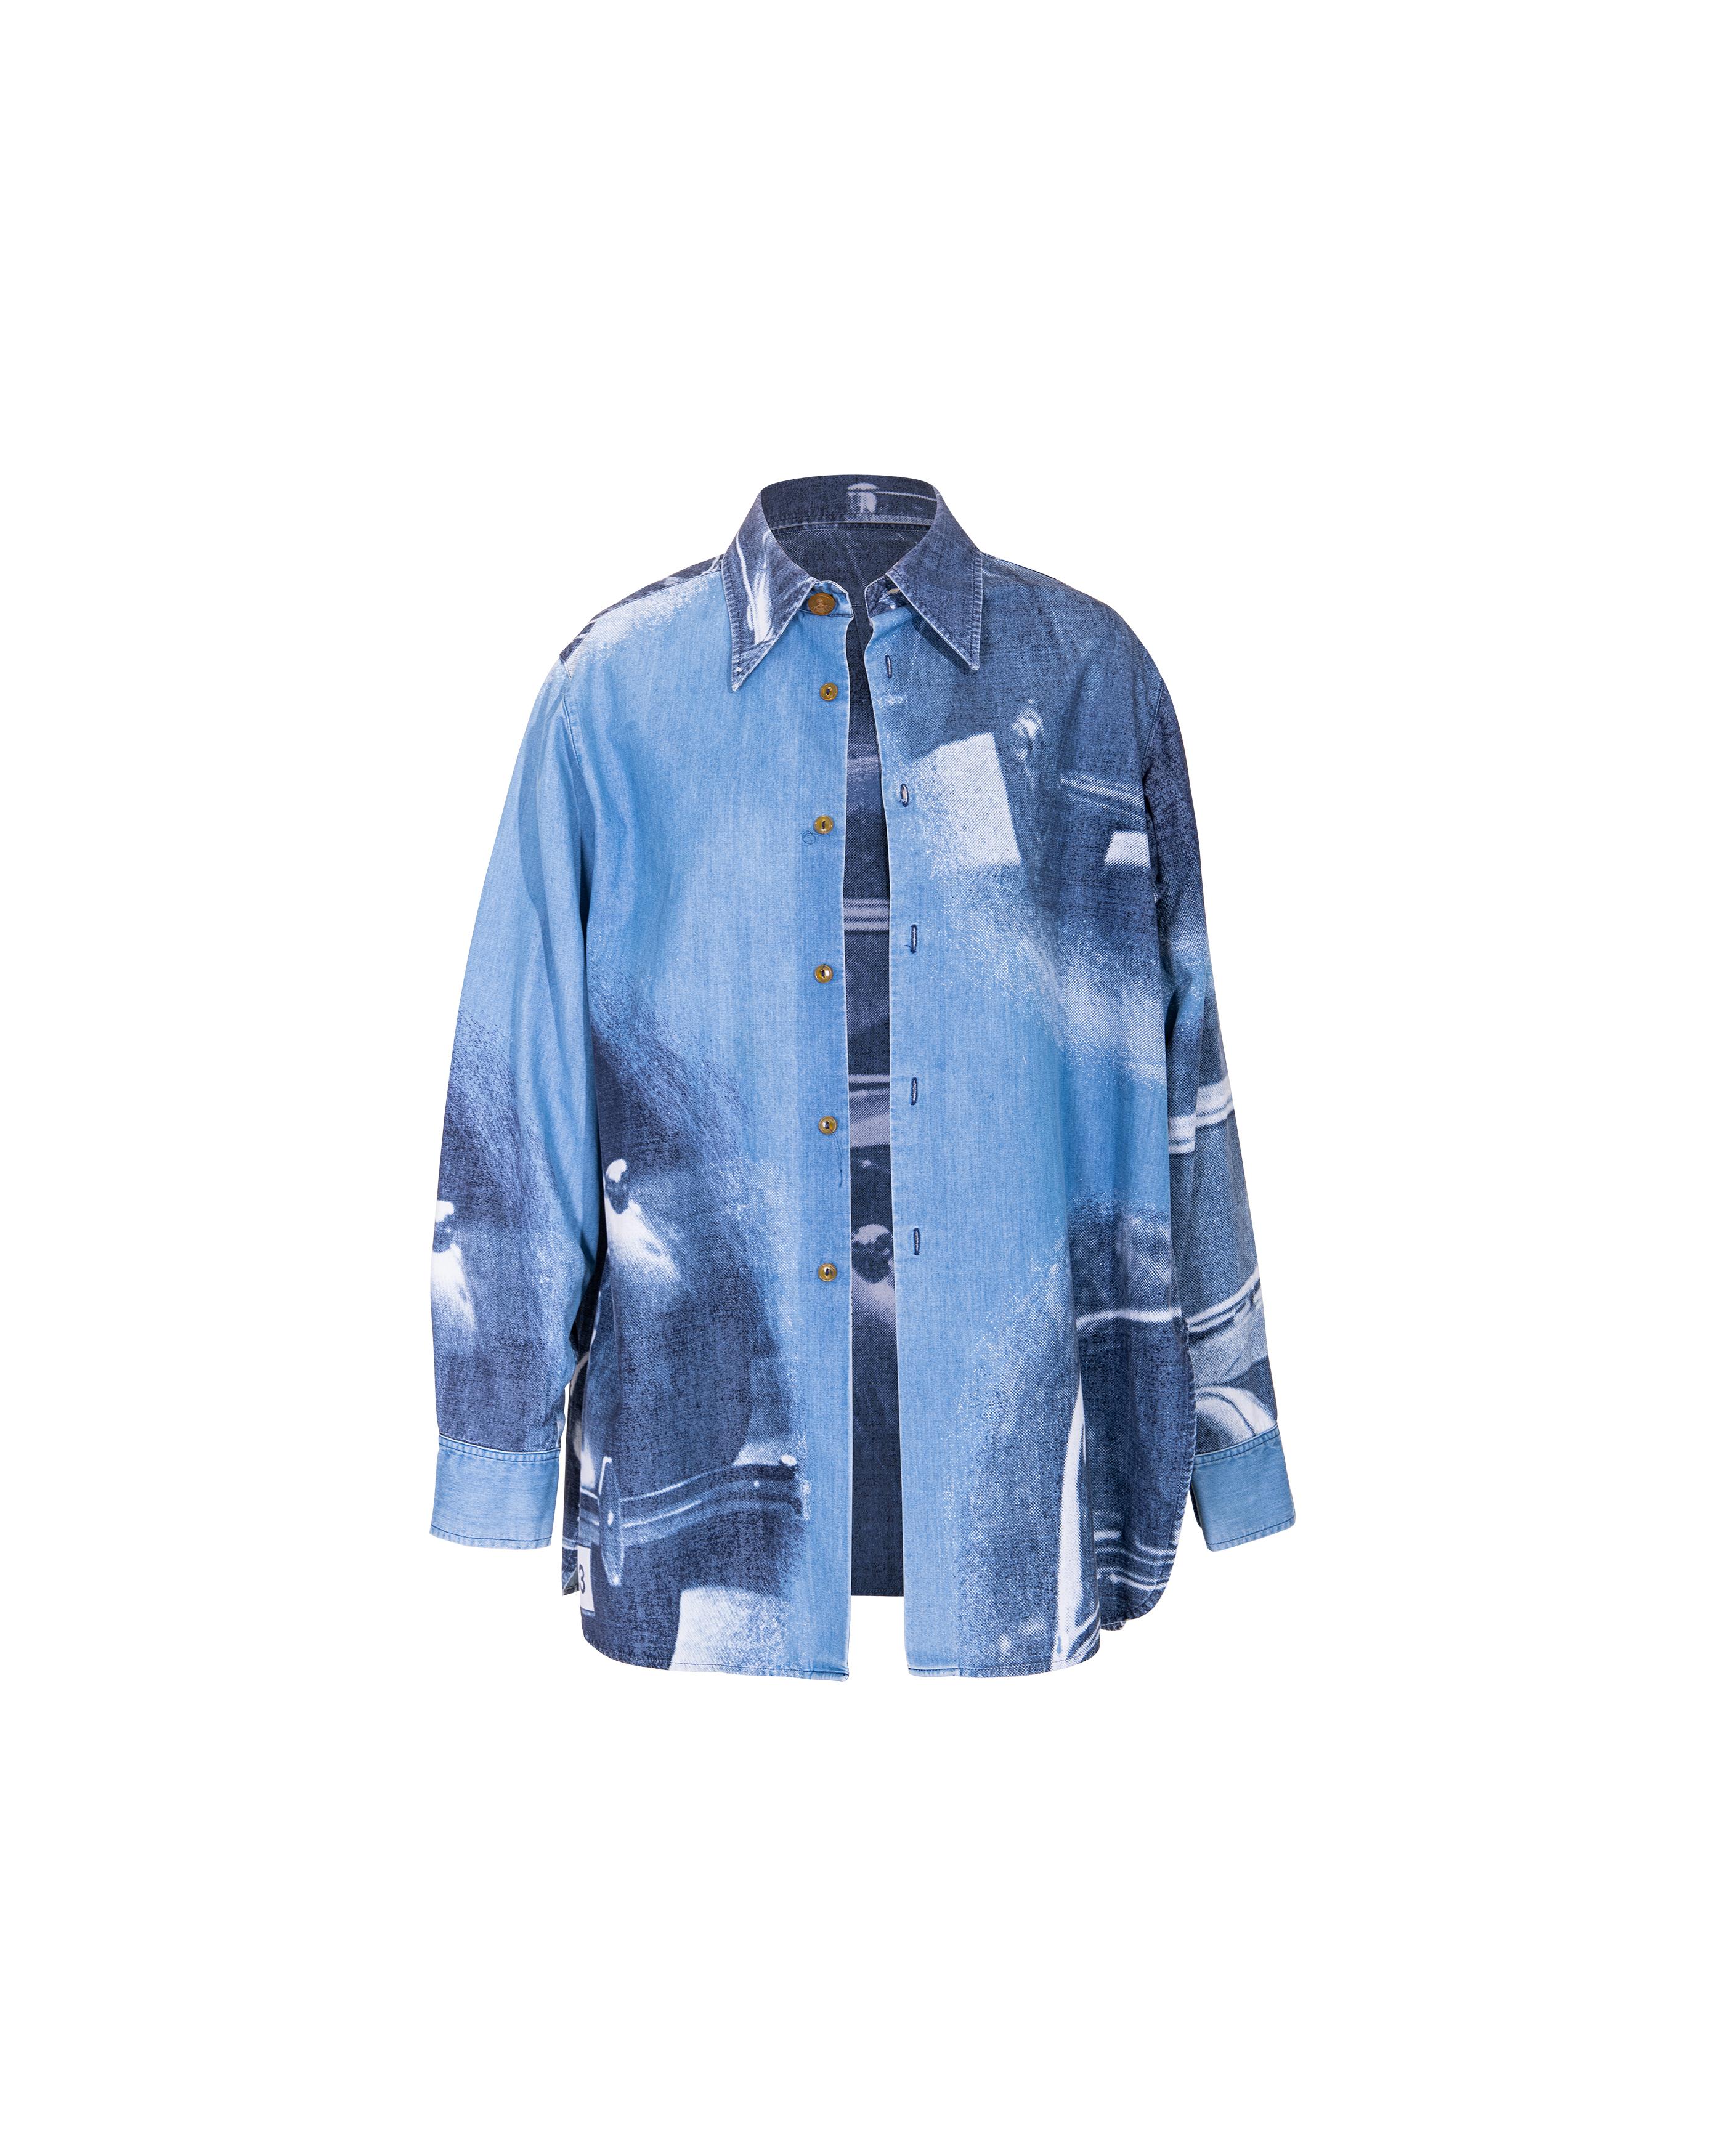 Women's A/W 1992 Vivienne Westwood 'Always on Camera' Collection Rolls Royce Button-Up